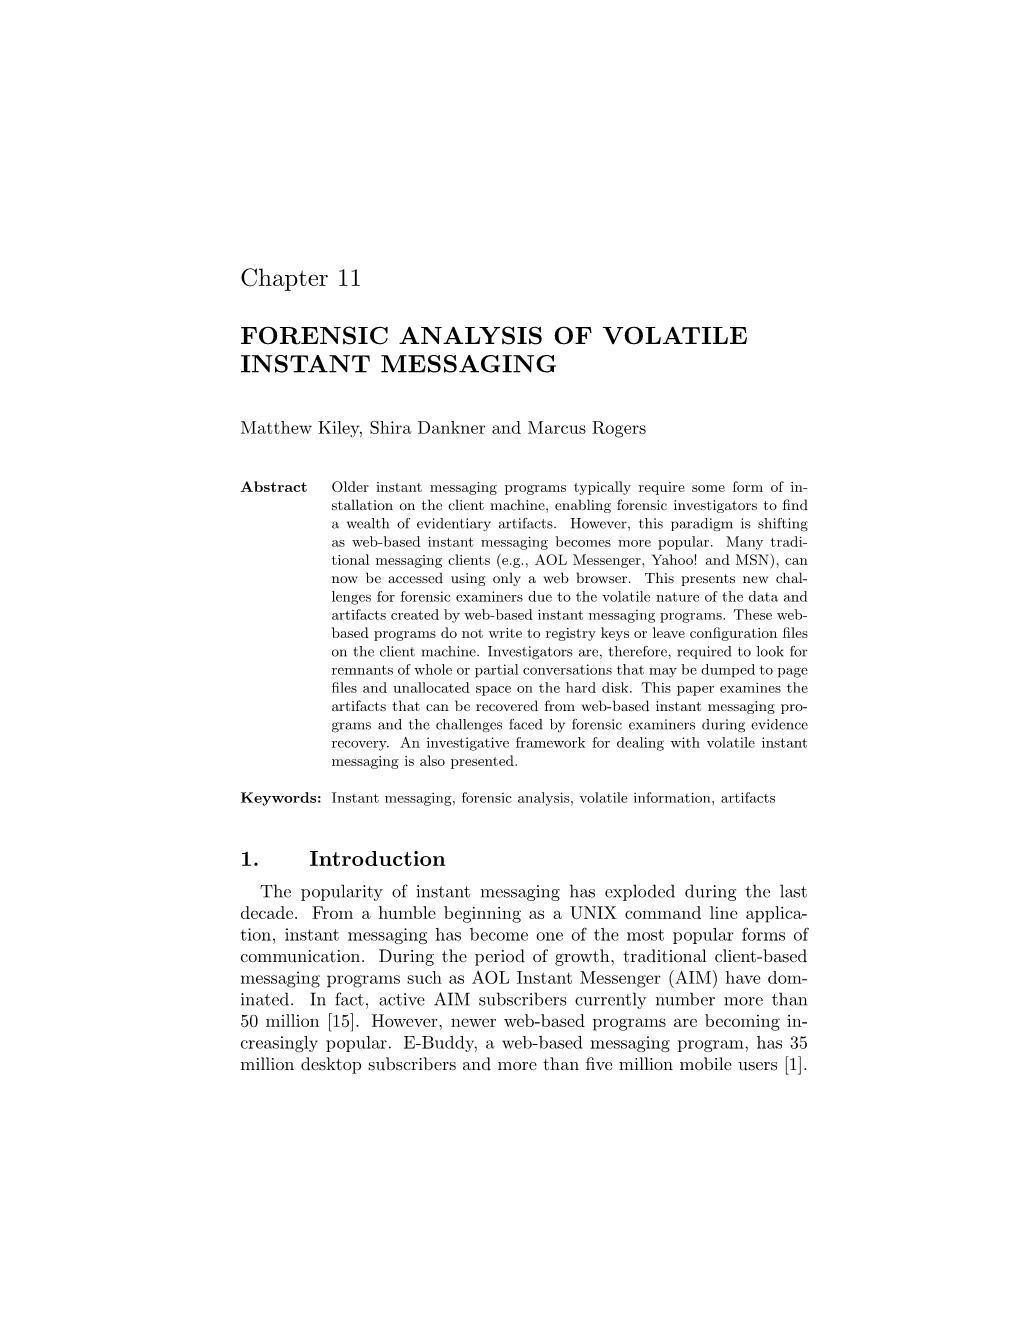 Forensic Analysis of Volatile Instant Messaging